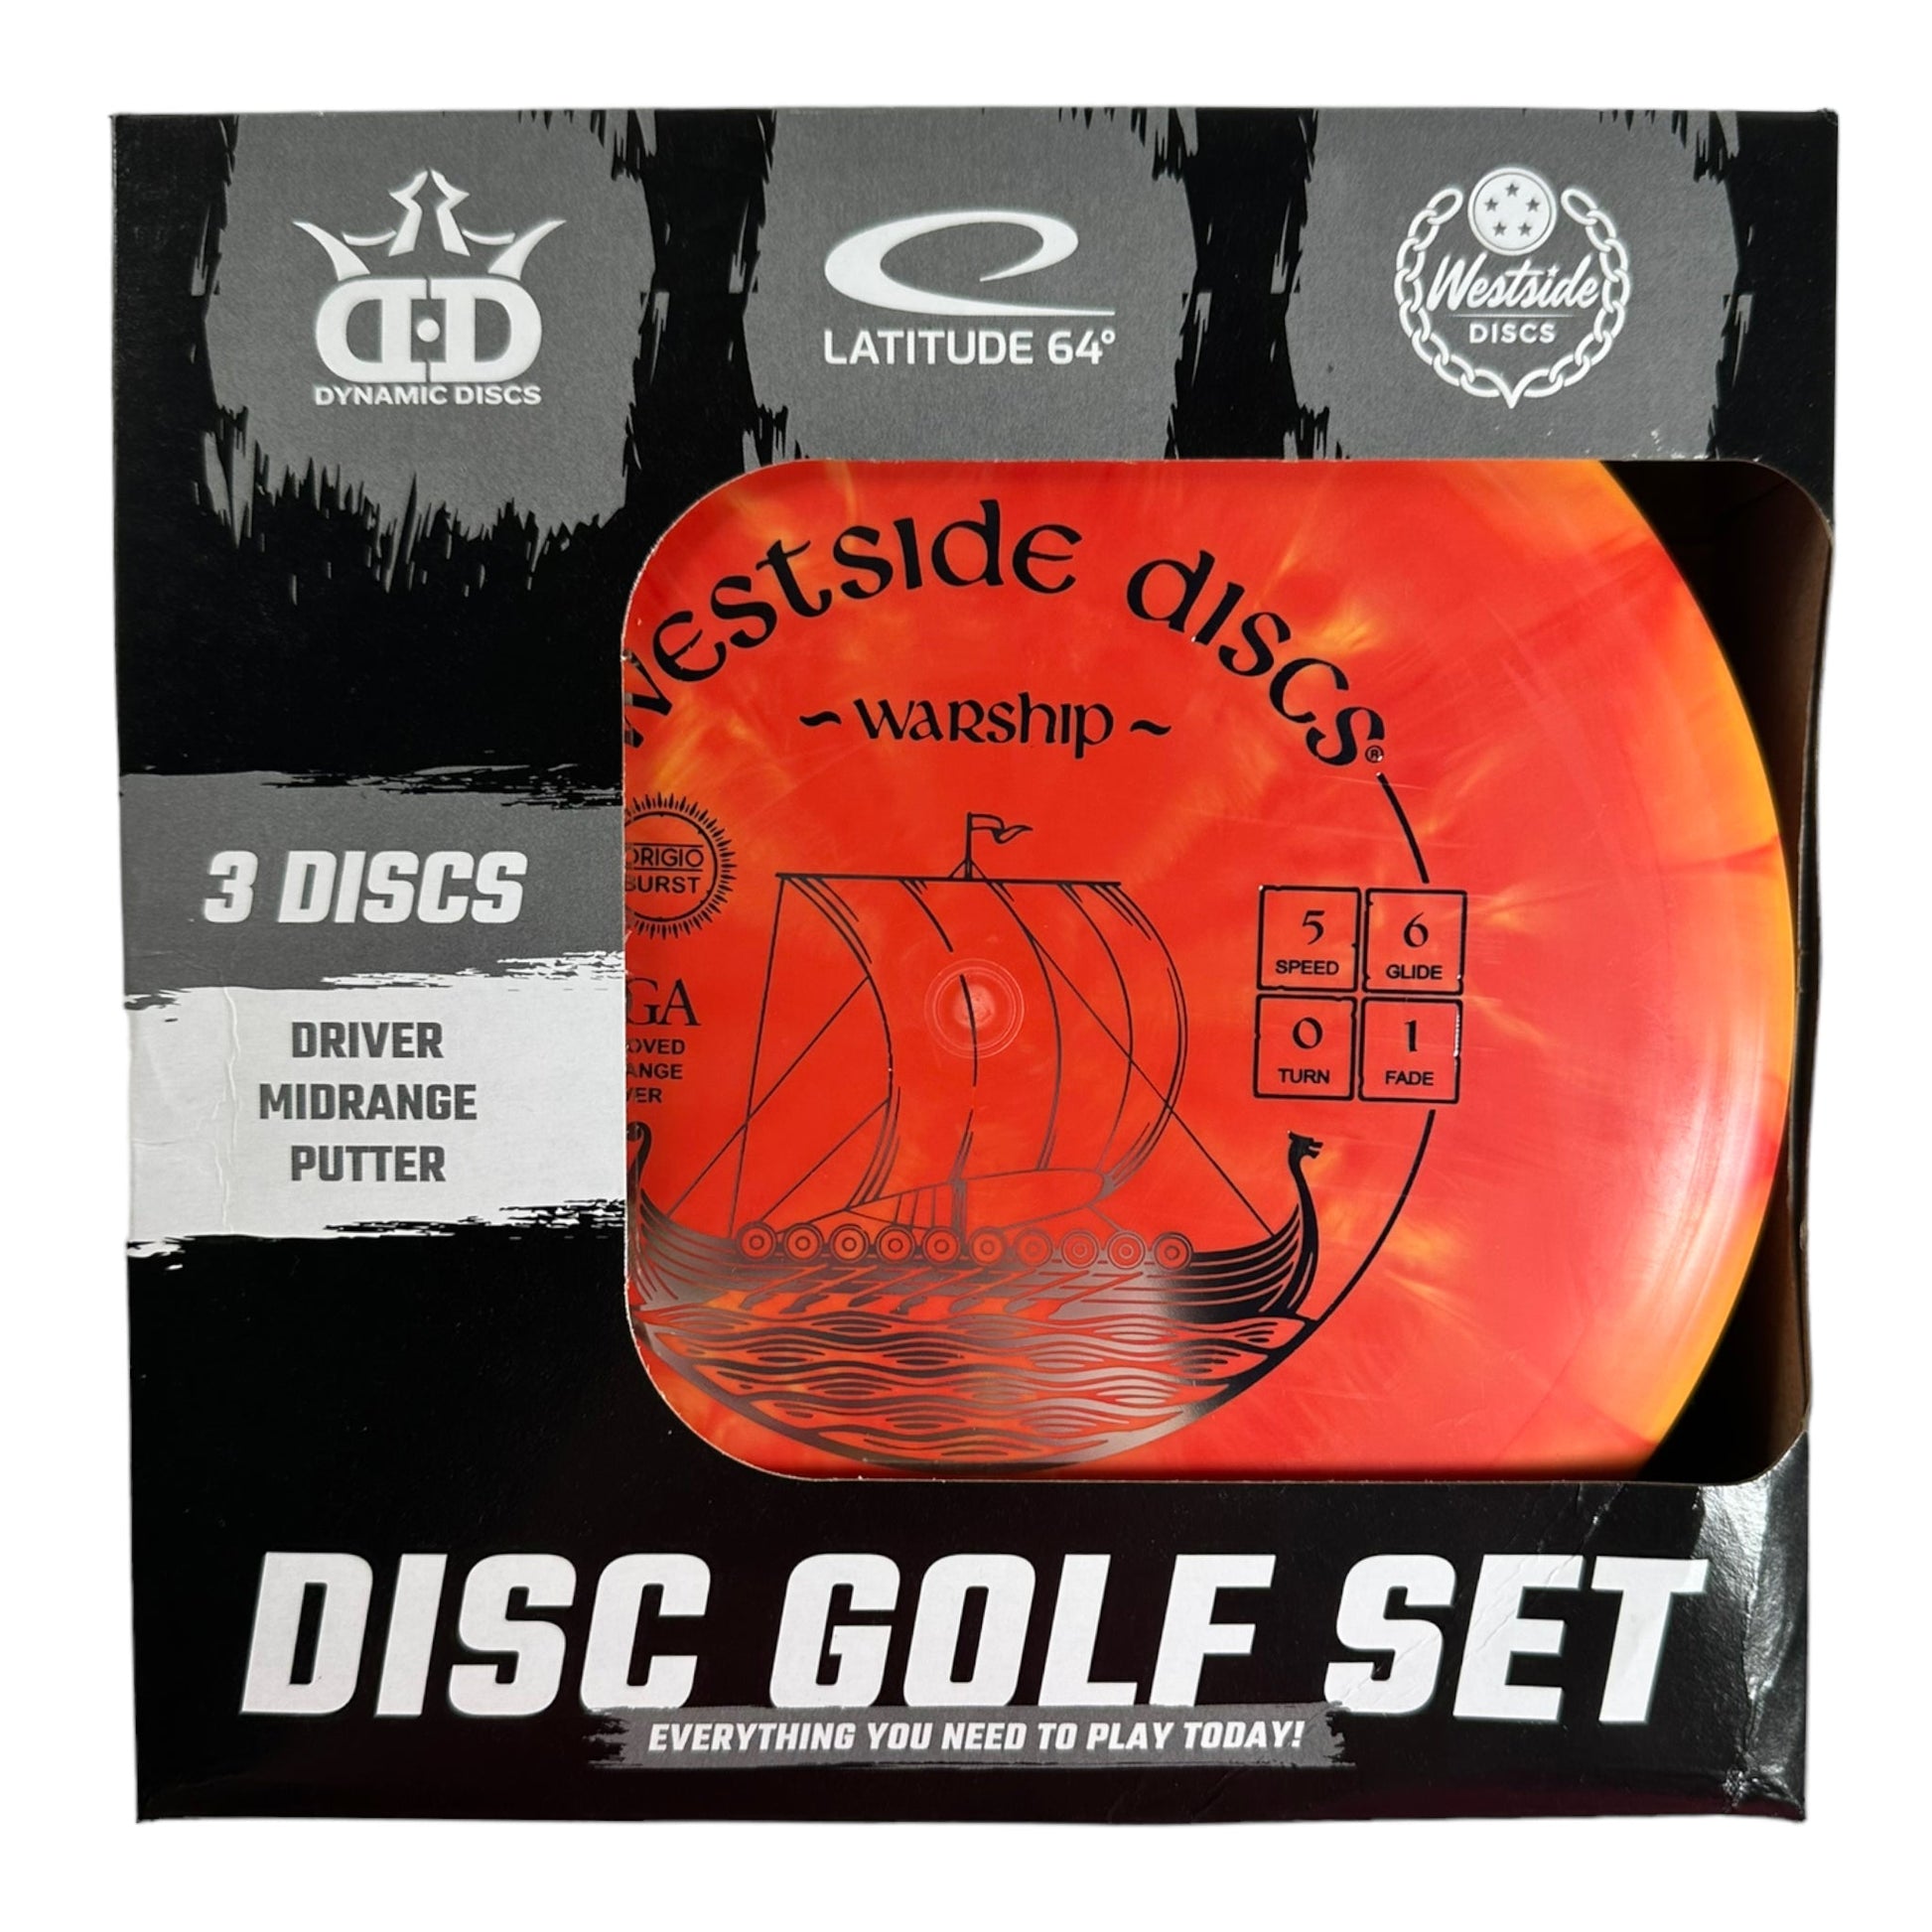 Trilogy Disc Golf Starter Set by Dynamic Discs – Perks and Re-creation